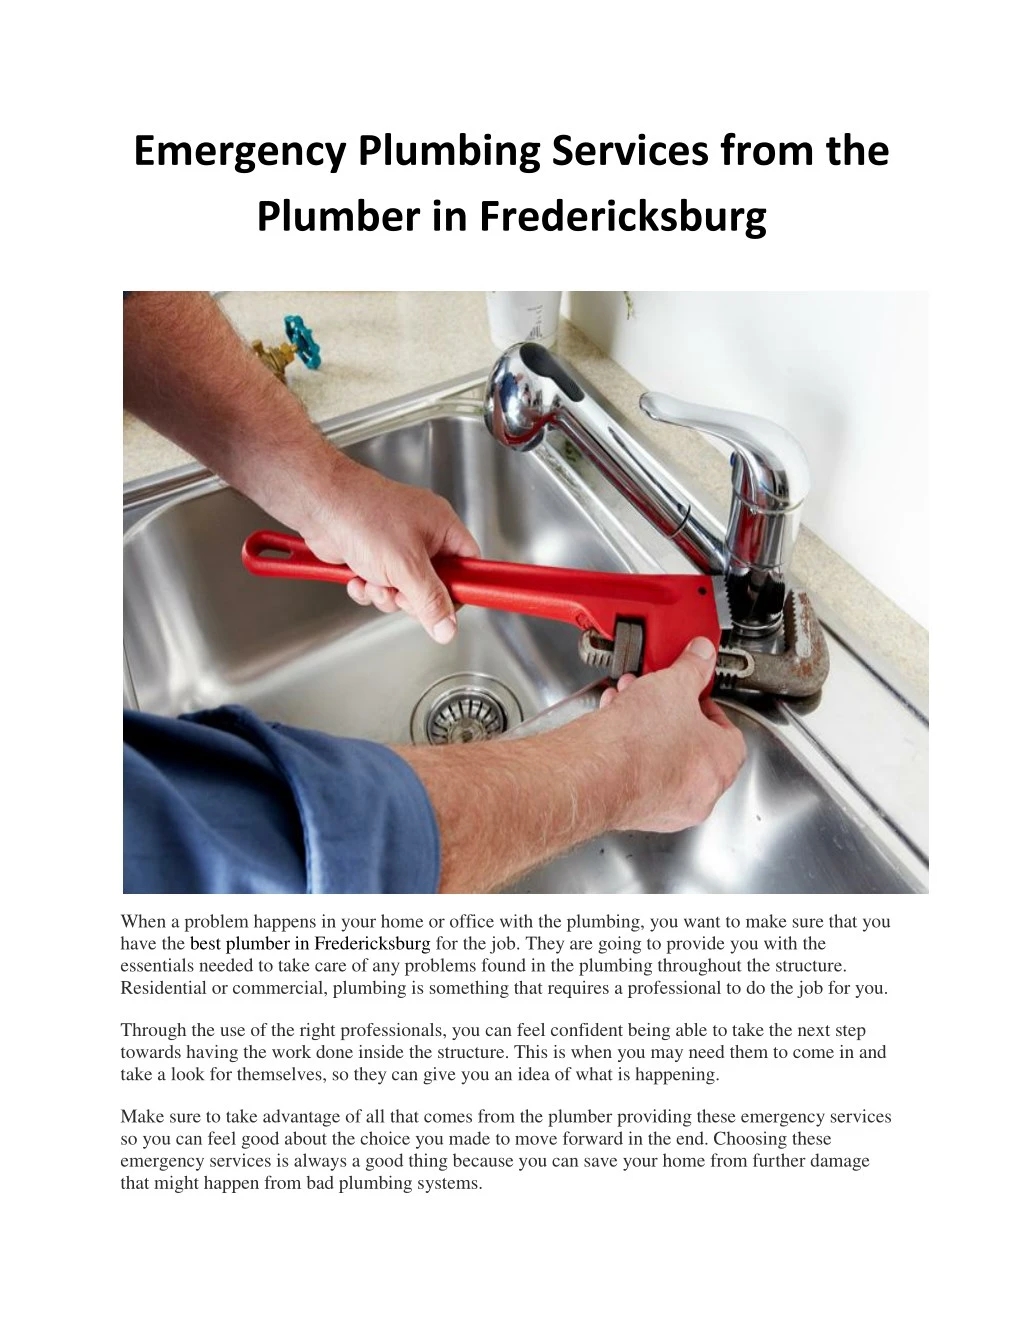 emergency plumbing services from the plumber